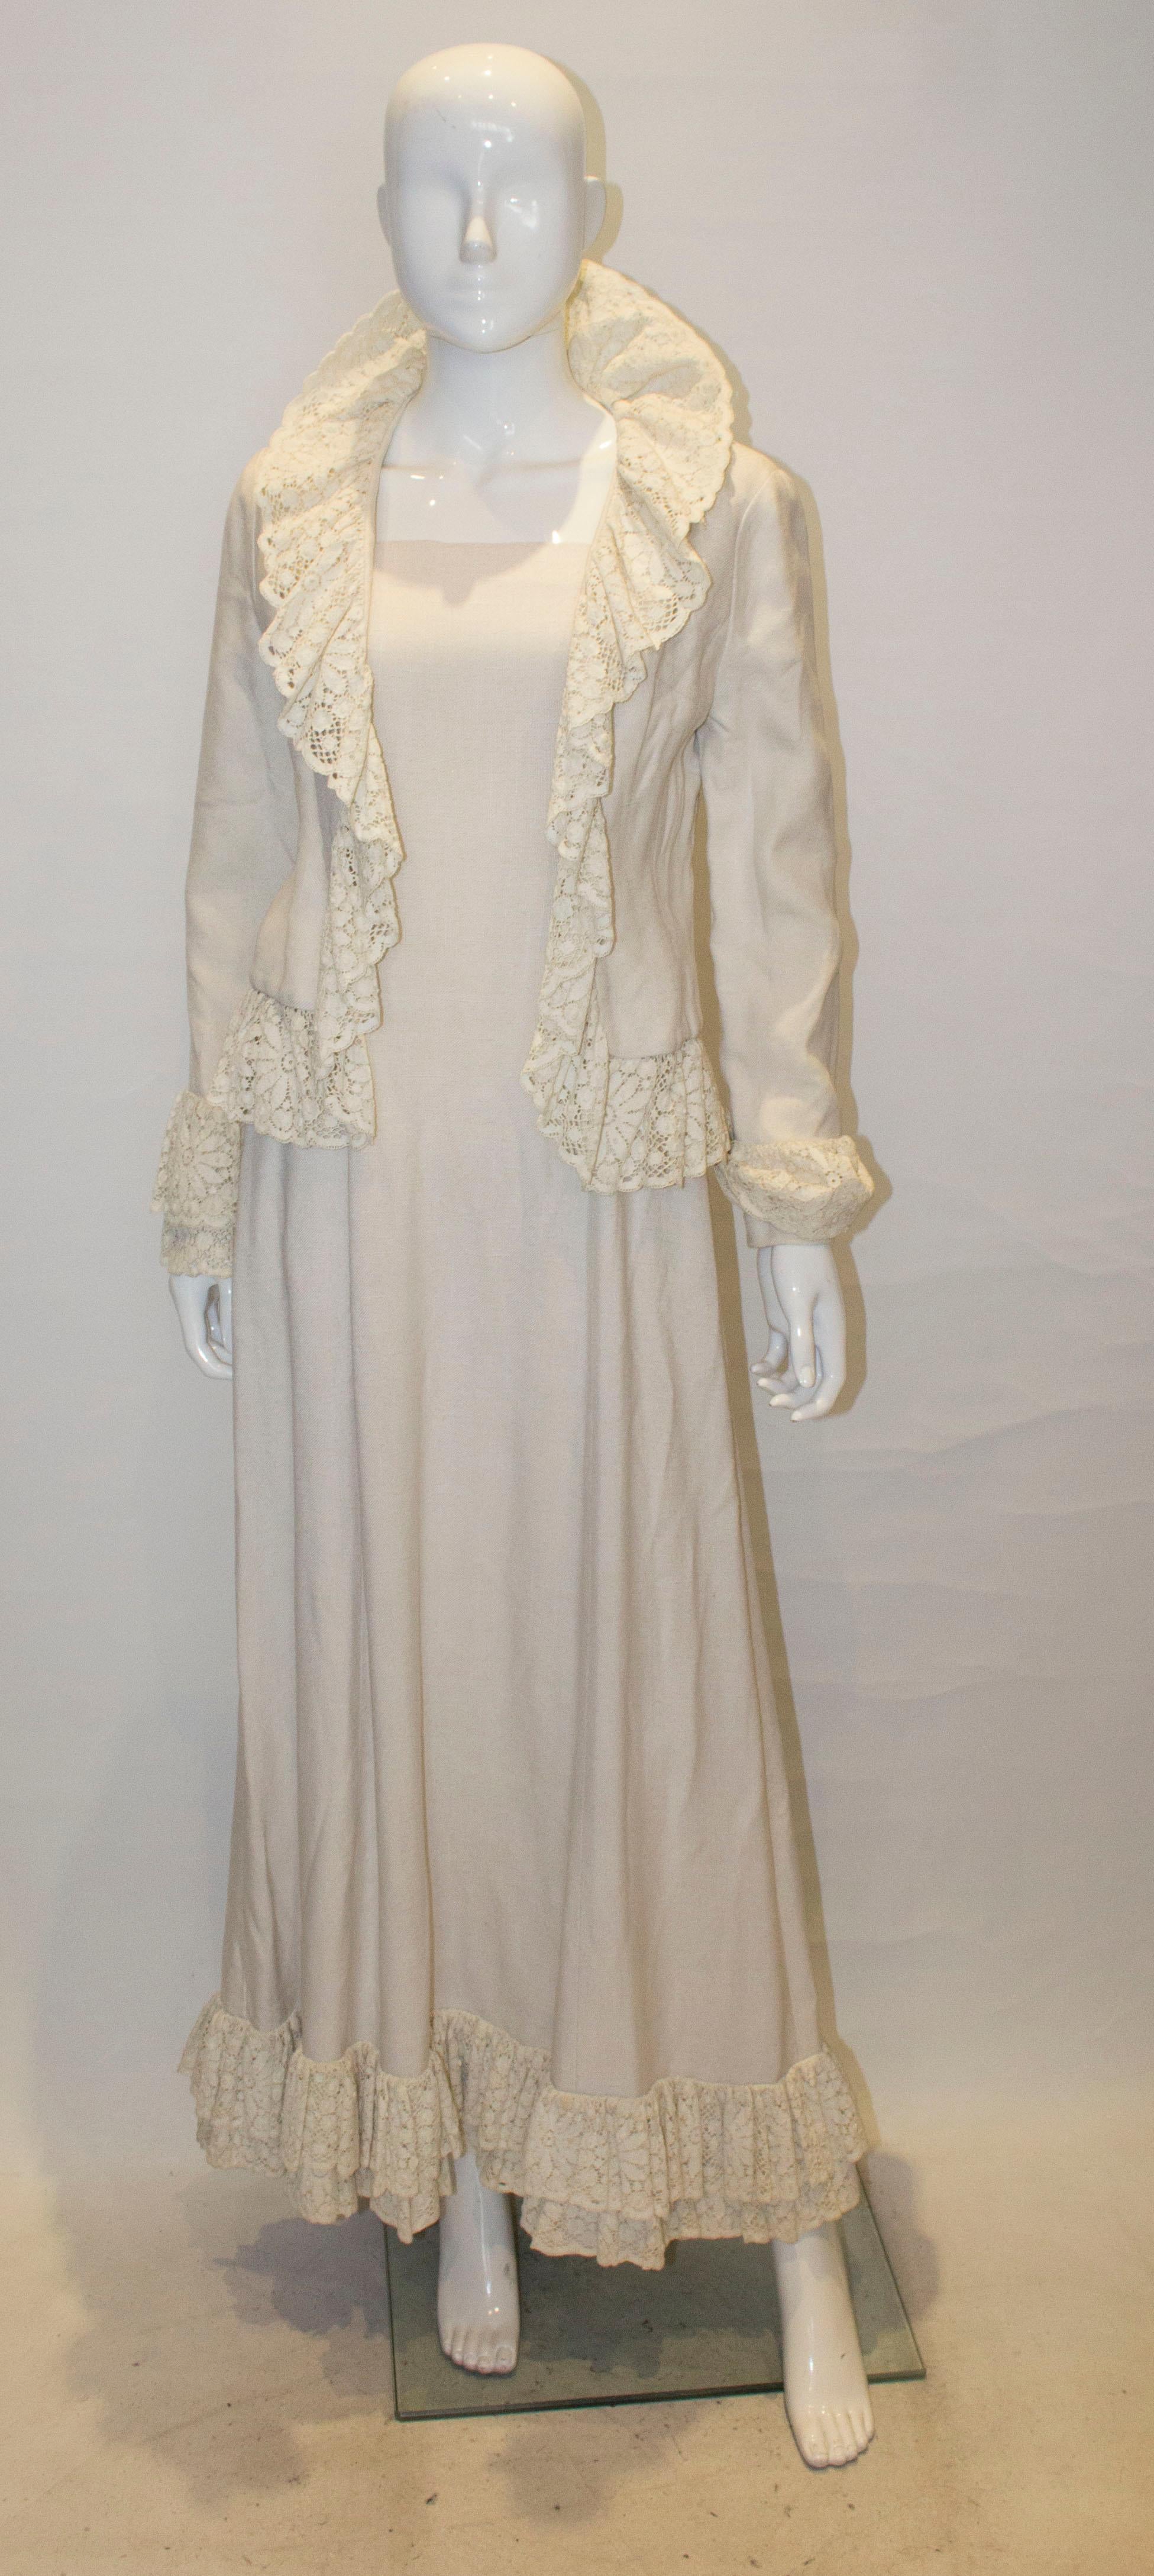 A long white linen vintage dress with matching jacket by Jean Allen. The dress is in a heavy linen with a square neckline and double row lace frill at the hem. The jacket has frill detail on the neckline and cuffs. Both are fully